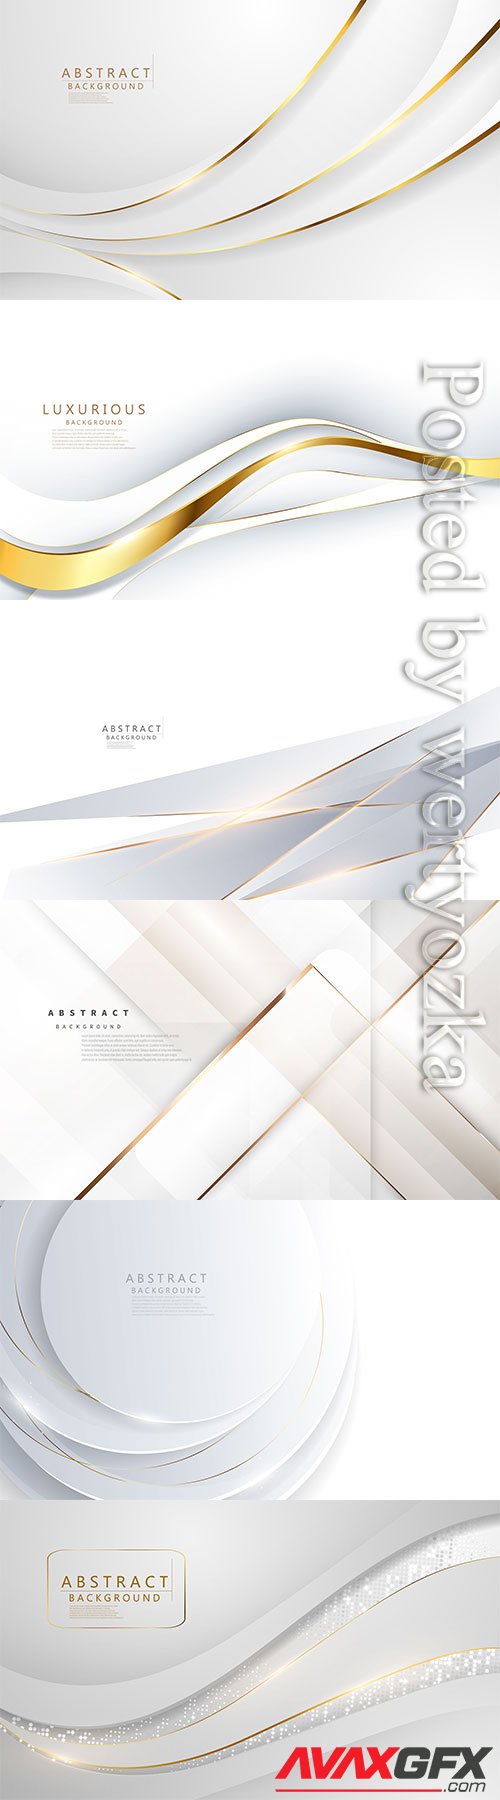 White abstract vector backgrounds with golden lines